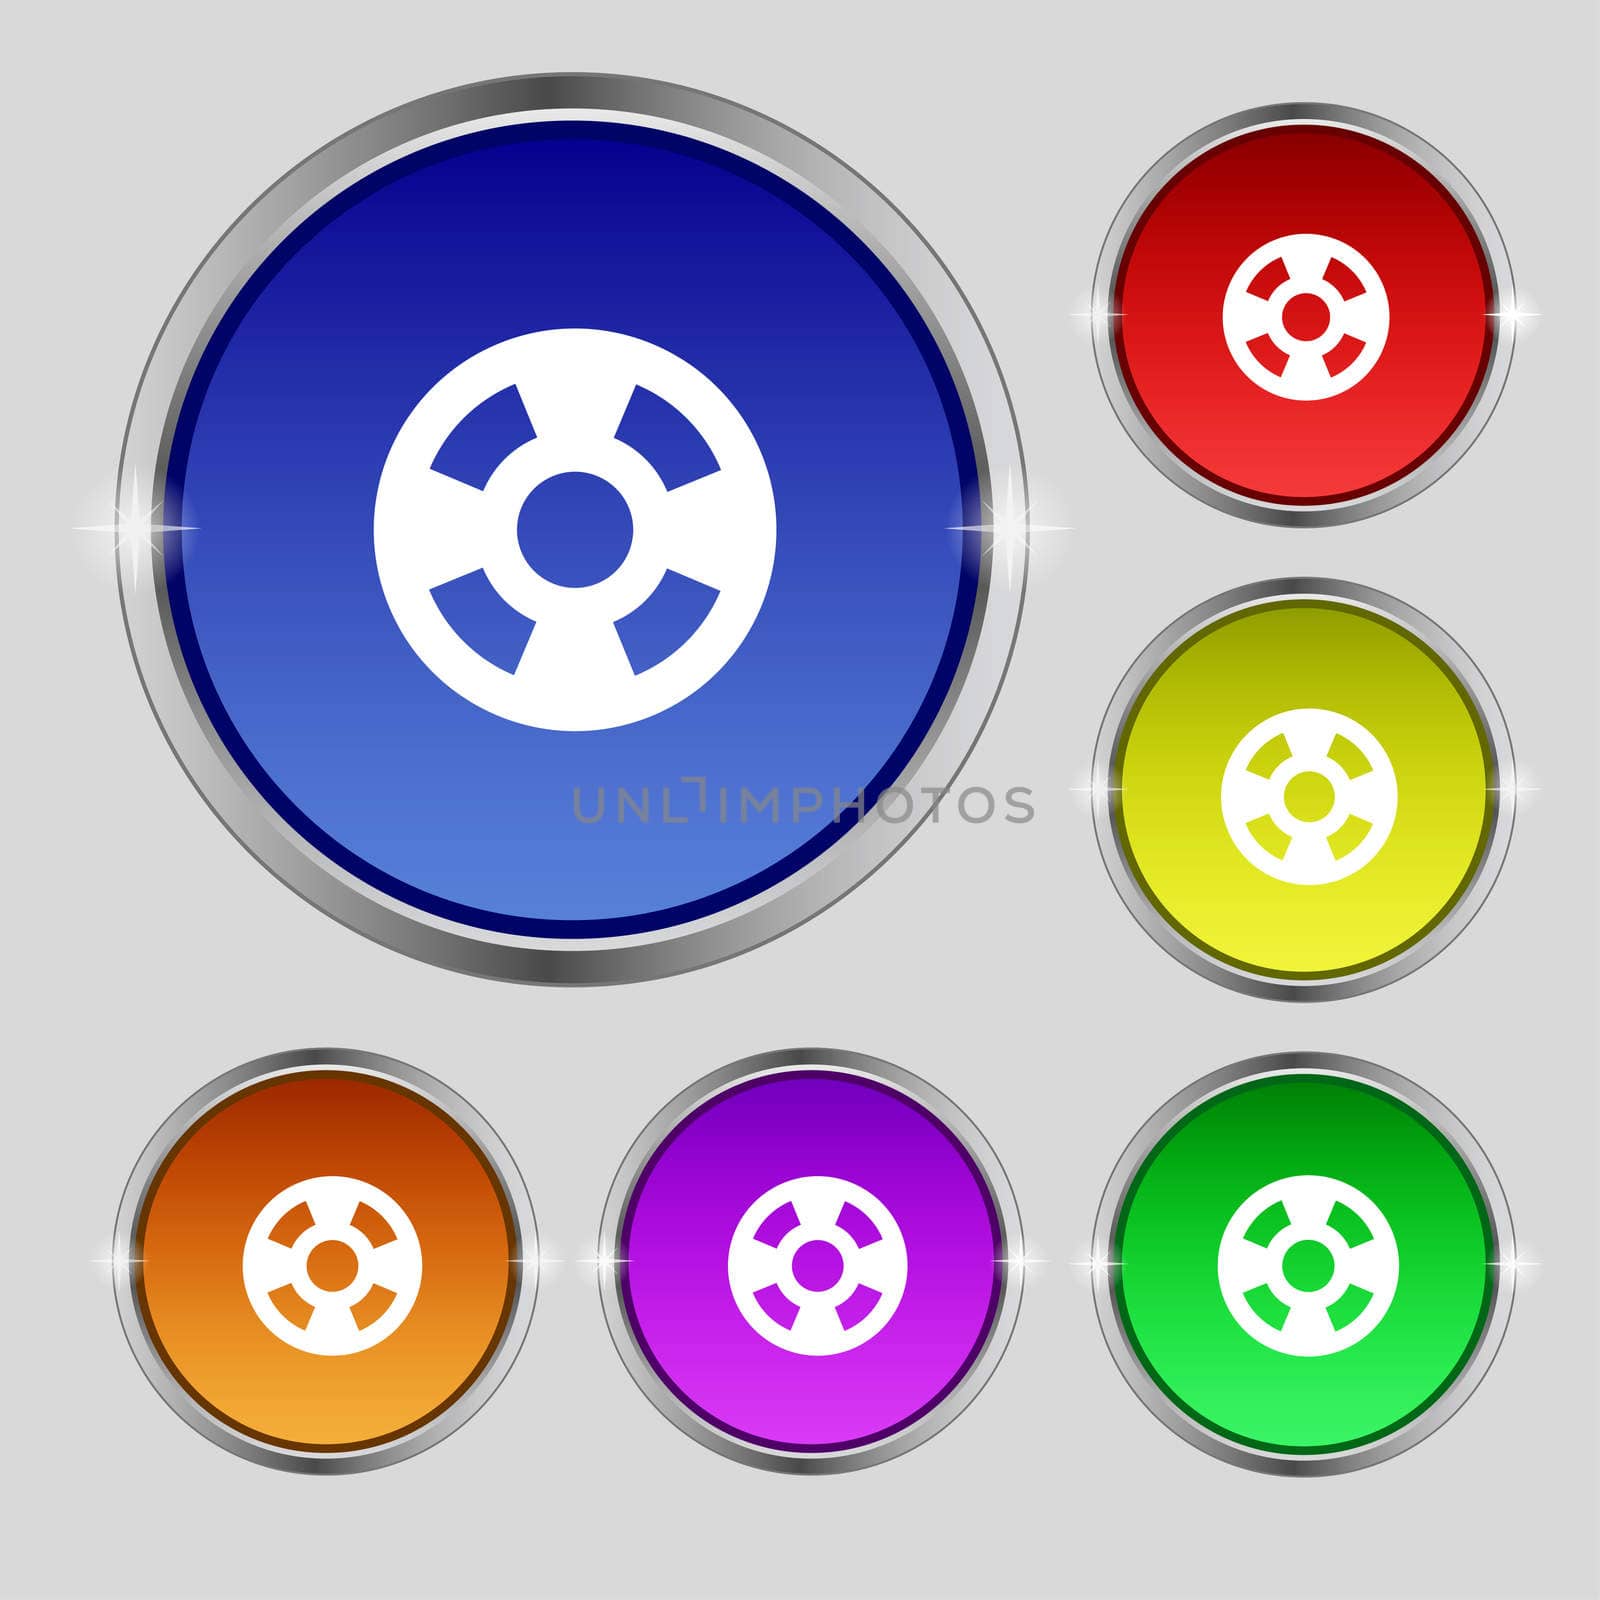 film icon sign. Round symbol on bright colourful buttons. illustration